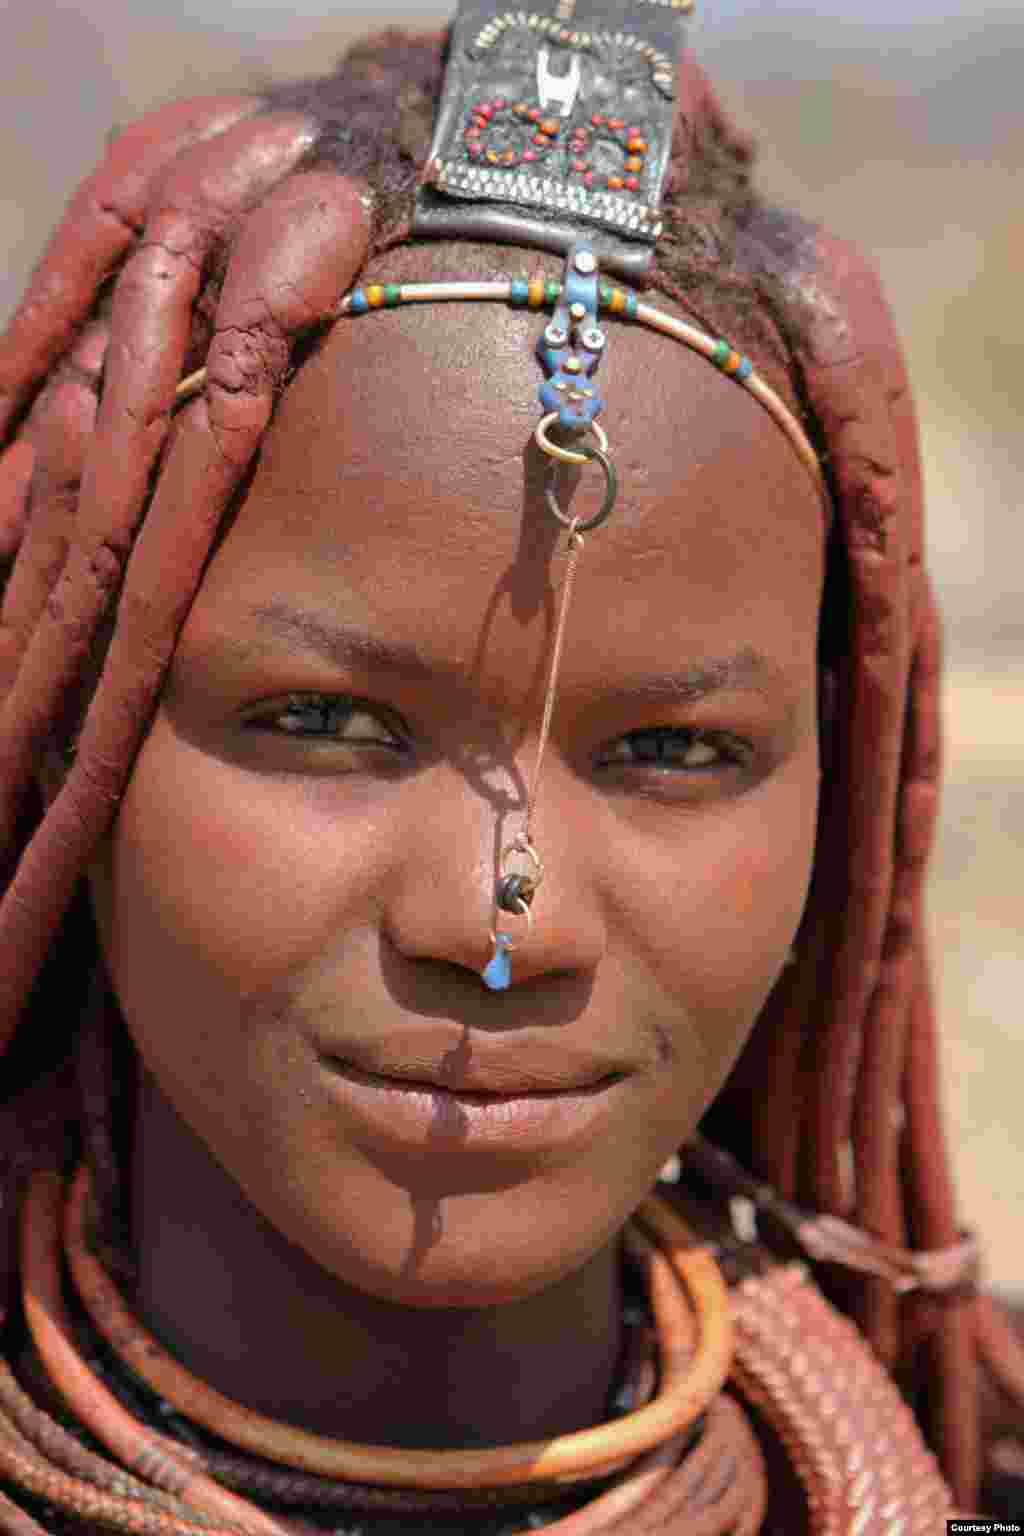 A young Himba girl smiles for a photo in northern Namibia near the Angola border (Jeff Leach/Namibia/VOA reader)